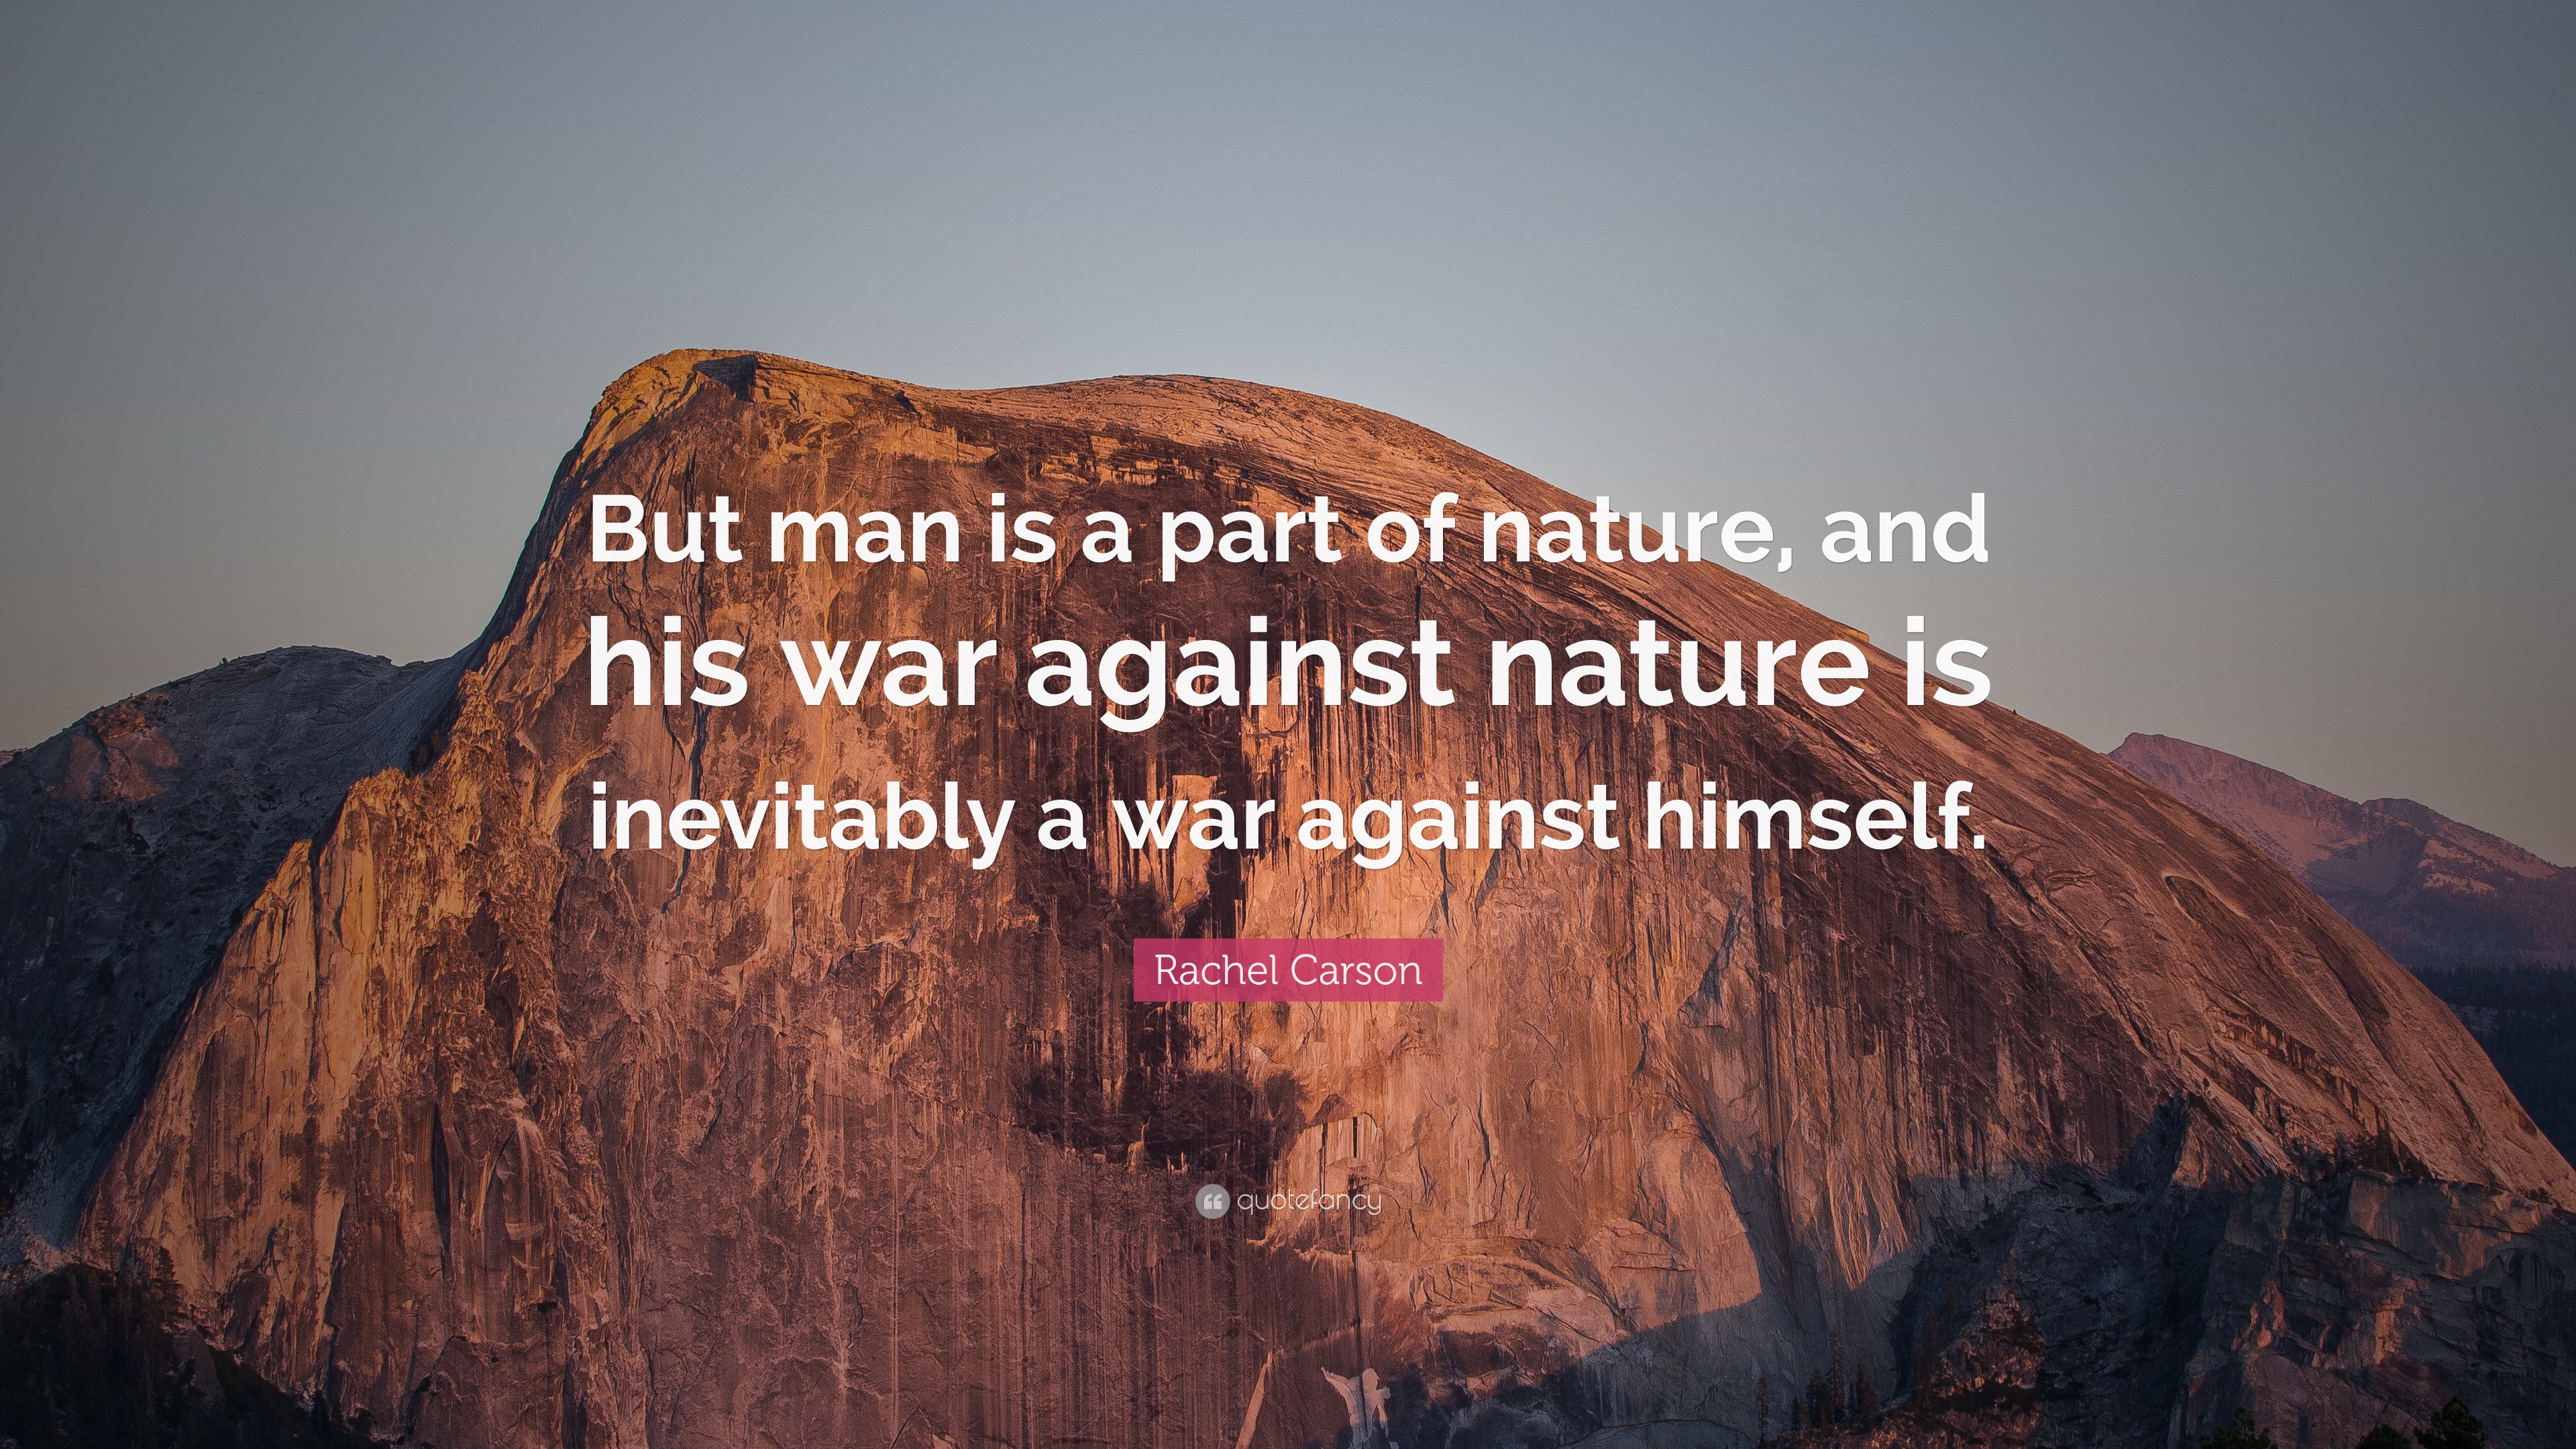 Rachel Carson Quote: “But man is a part of nature, and his war against